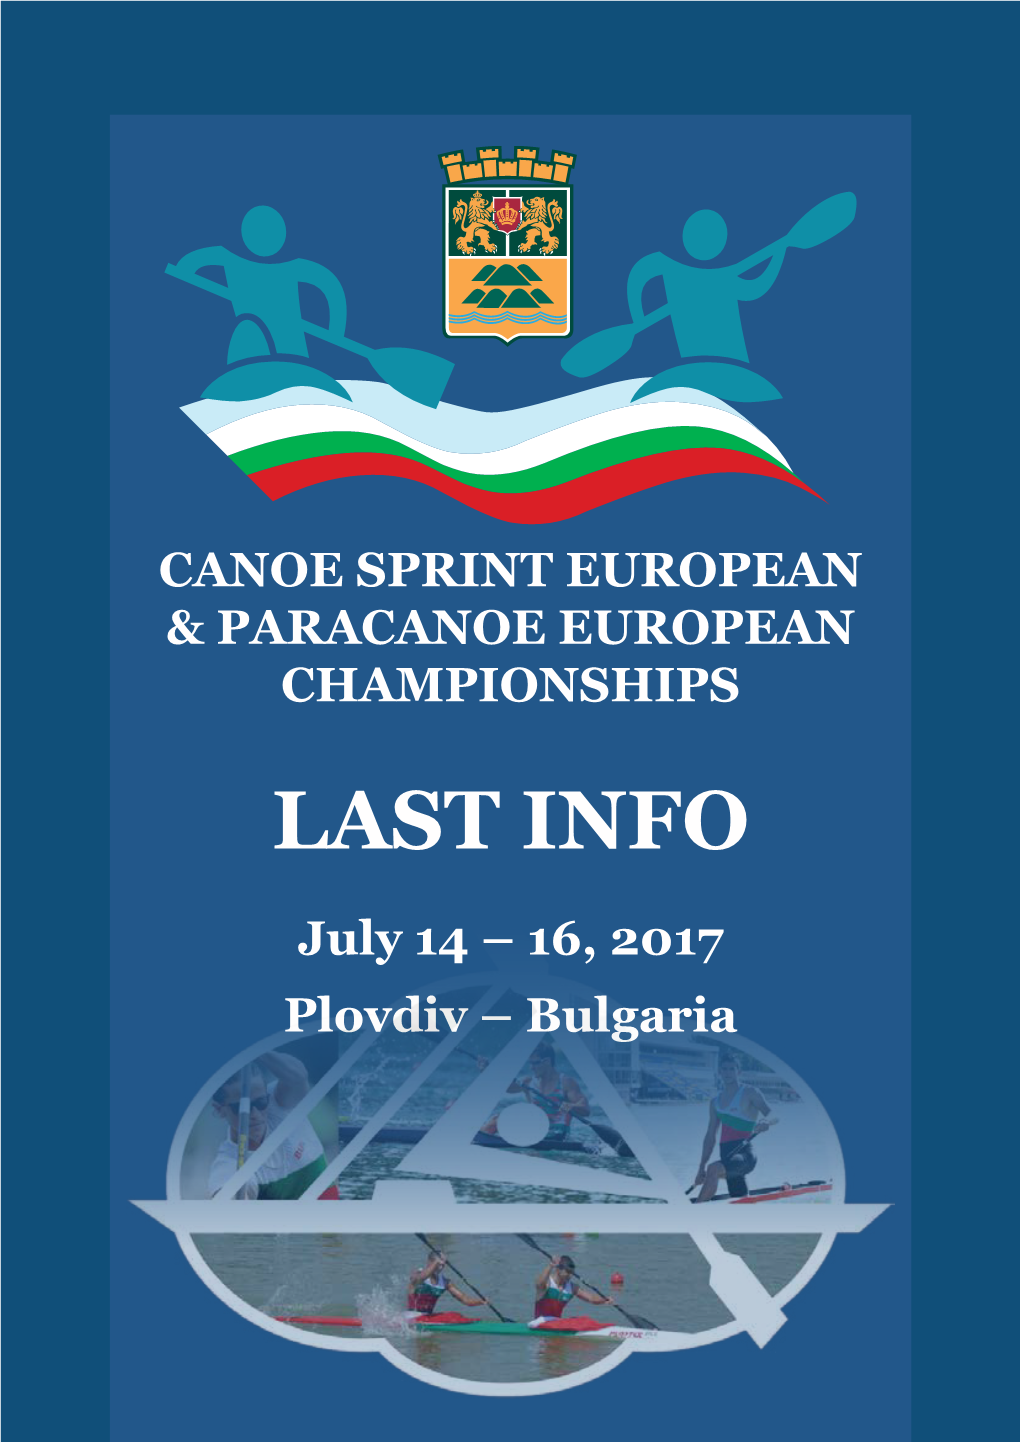 LAST INFO July 14 – 16, 2017 Plovdiv – Bulgaria Contact Can Be Made with the Organising Committee By